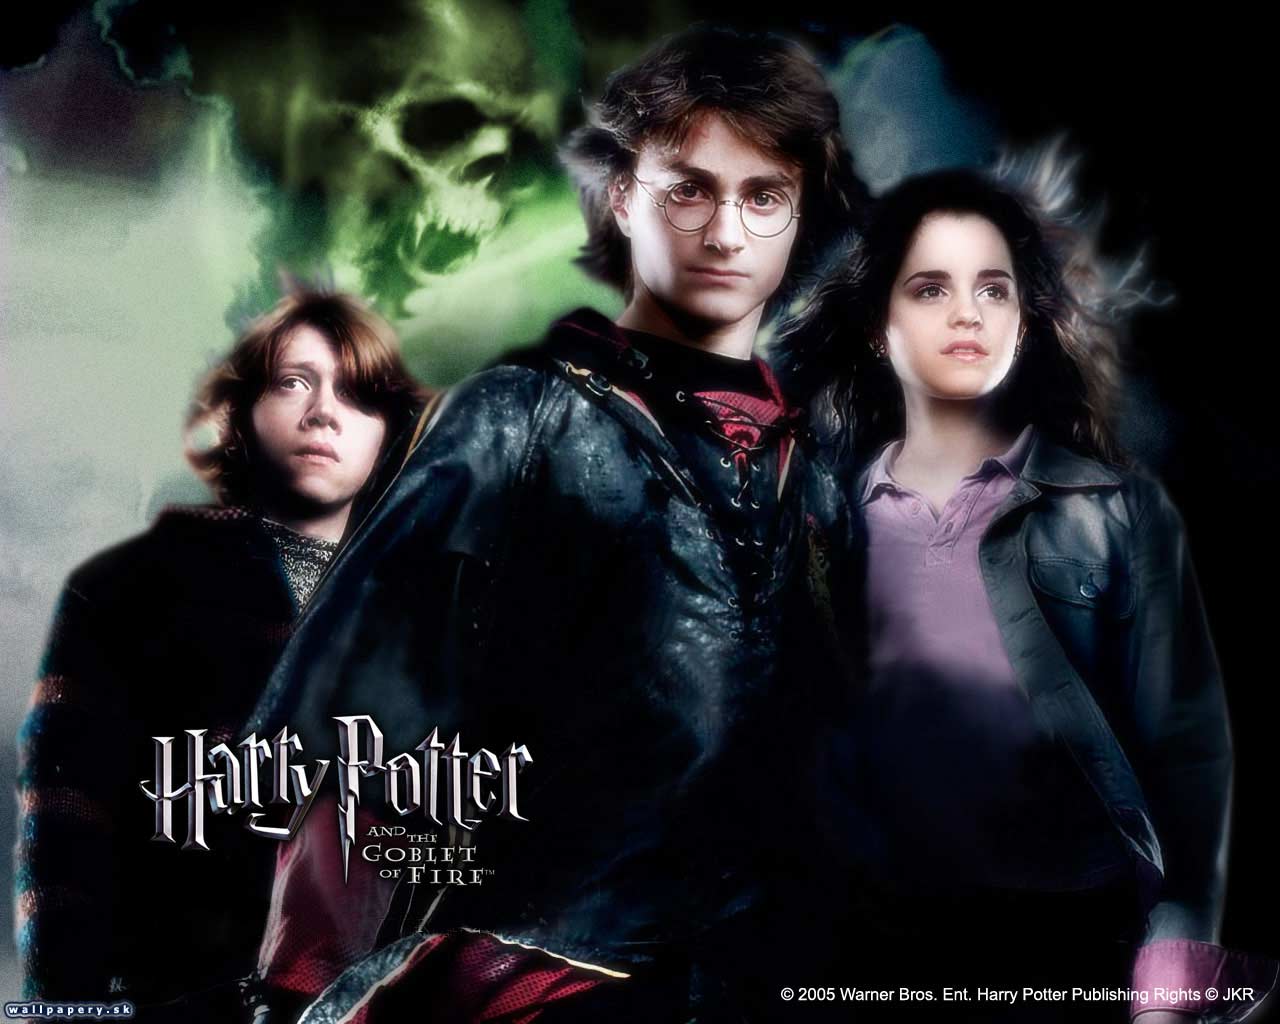 Harry Potter and the Goblet of Fire - wallpaper 7